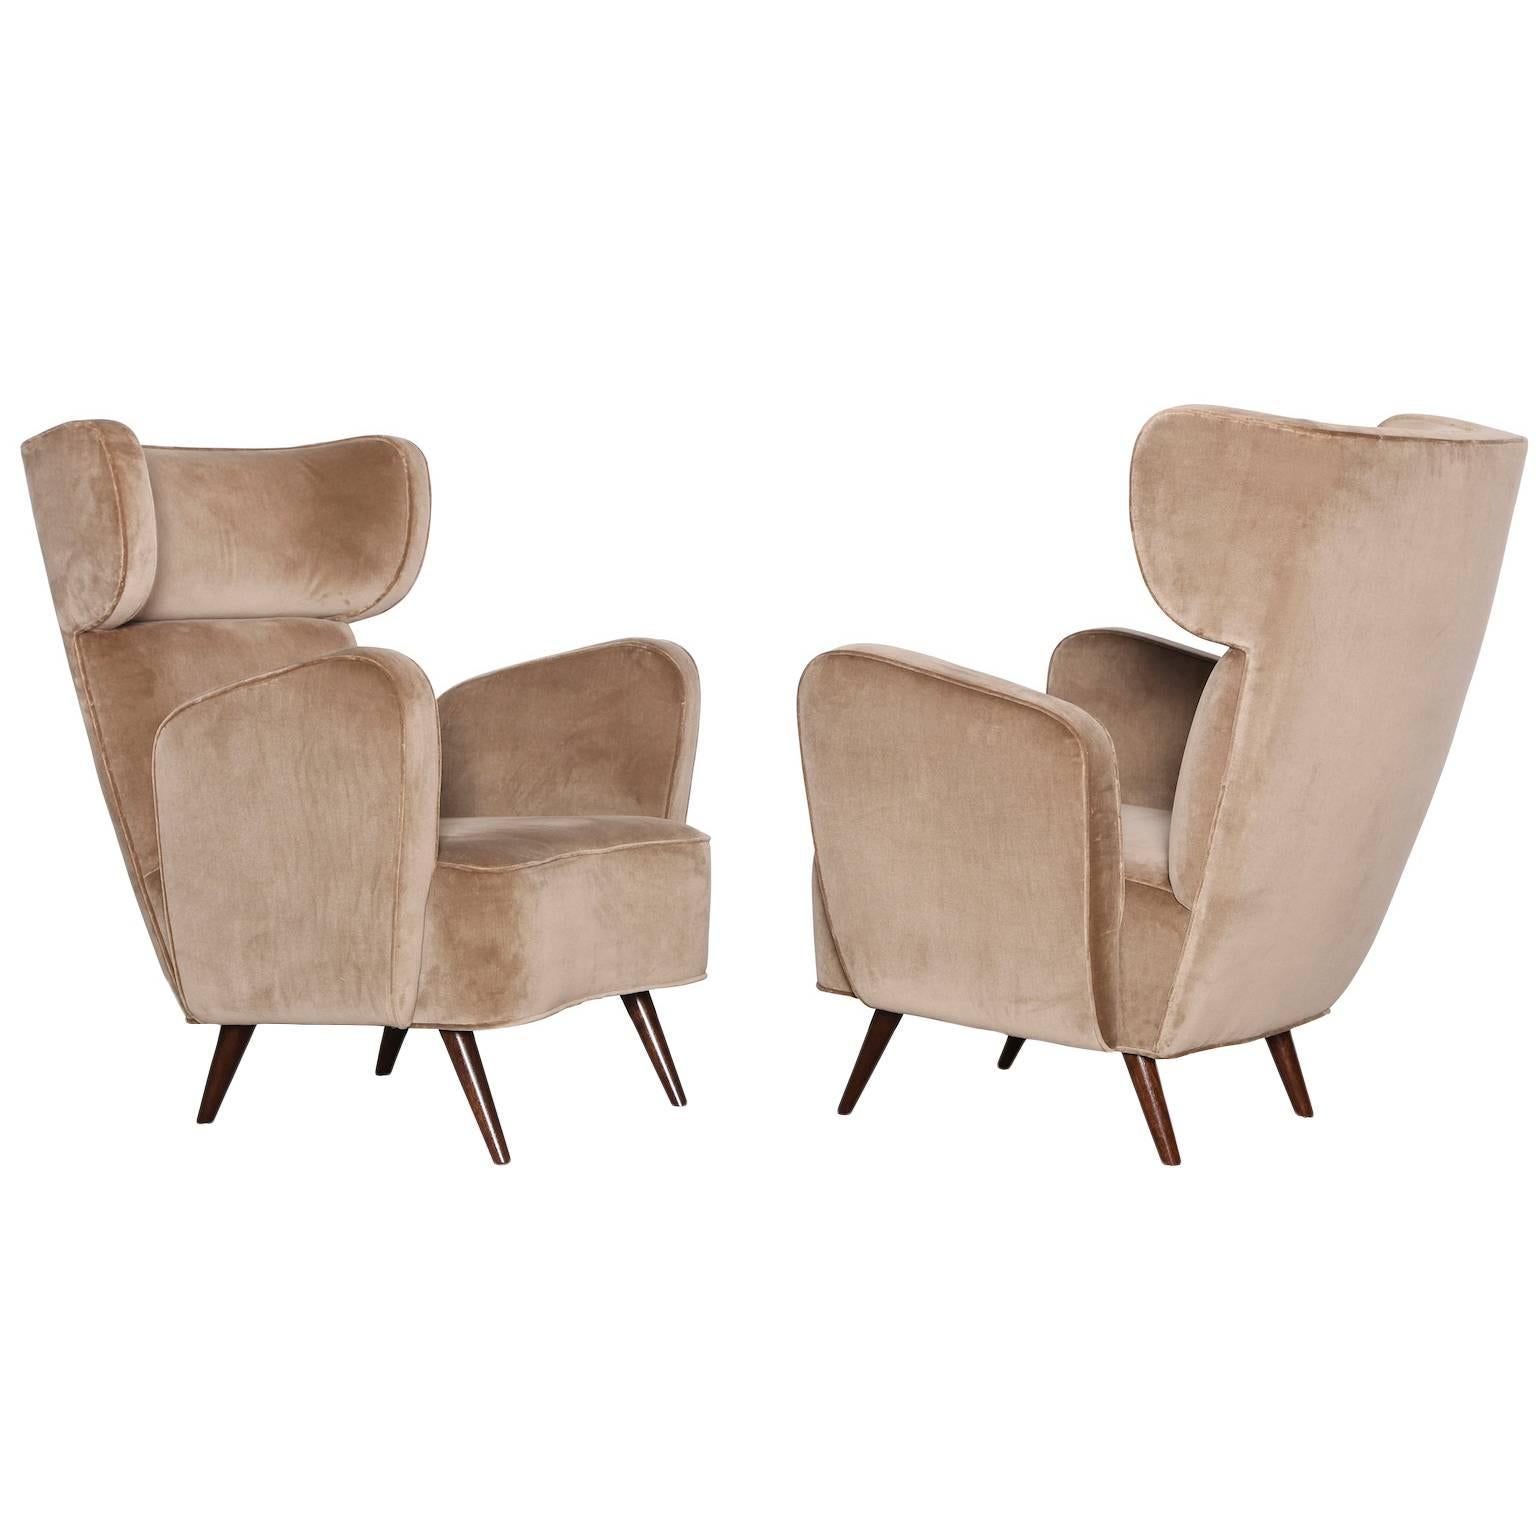 Inspired by the 1st class lounges of Italian trains from the 1940s and 1950s. Sculptural forms with generous proportions and fantastic construction. These chairs are handmade to order and available exclusively through Donzella. Eight to twelve weeks